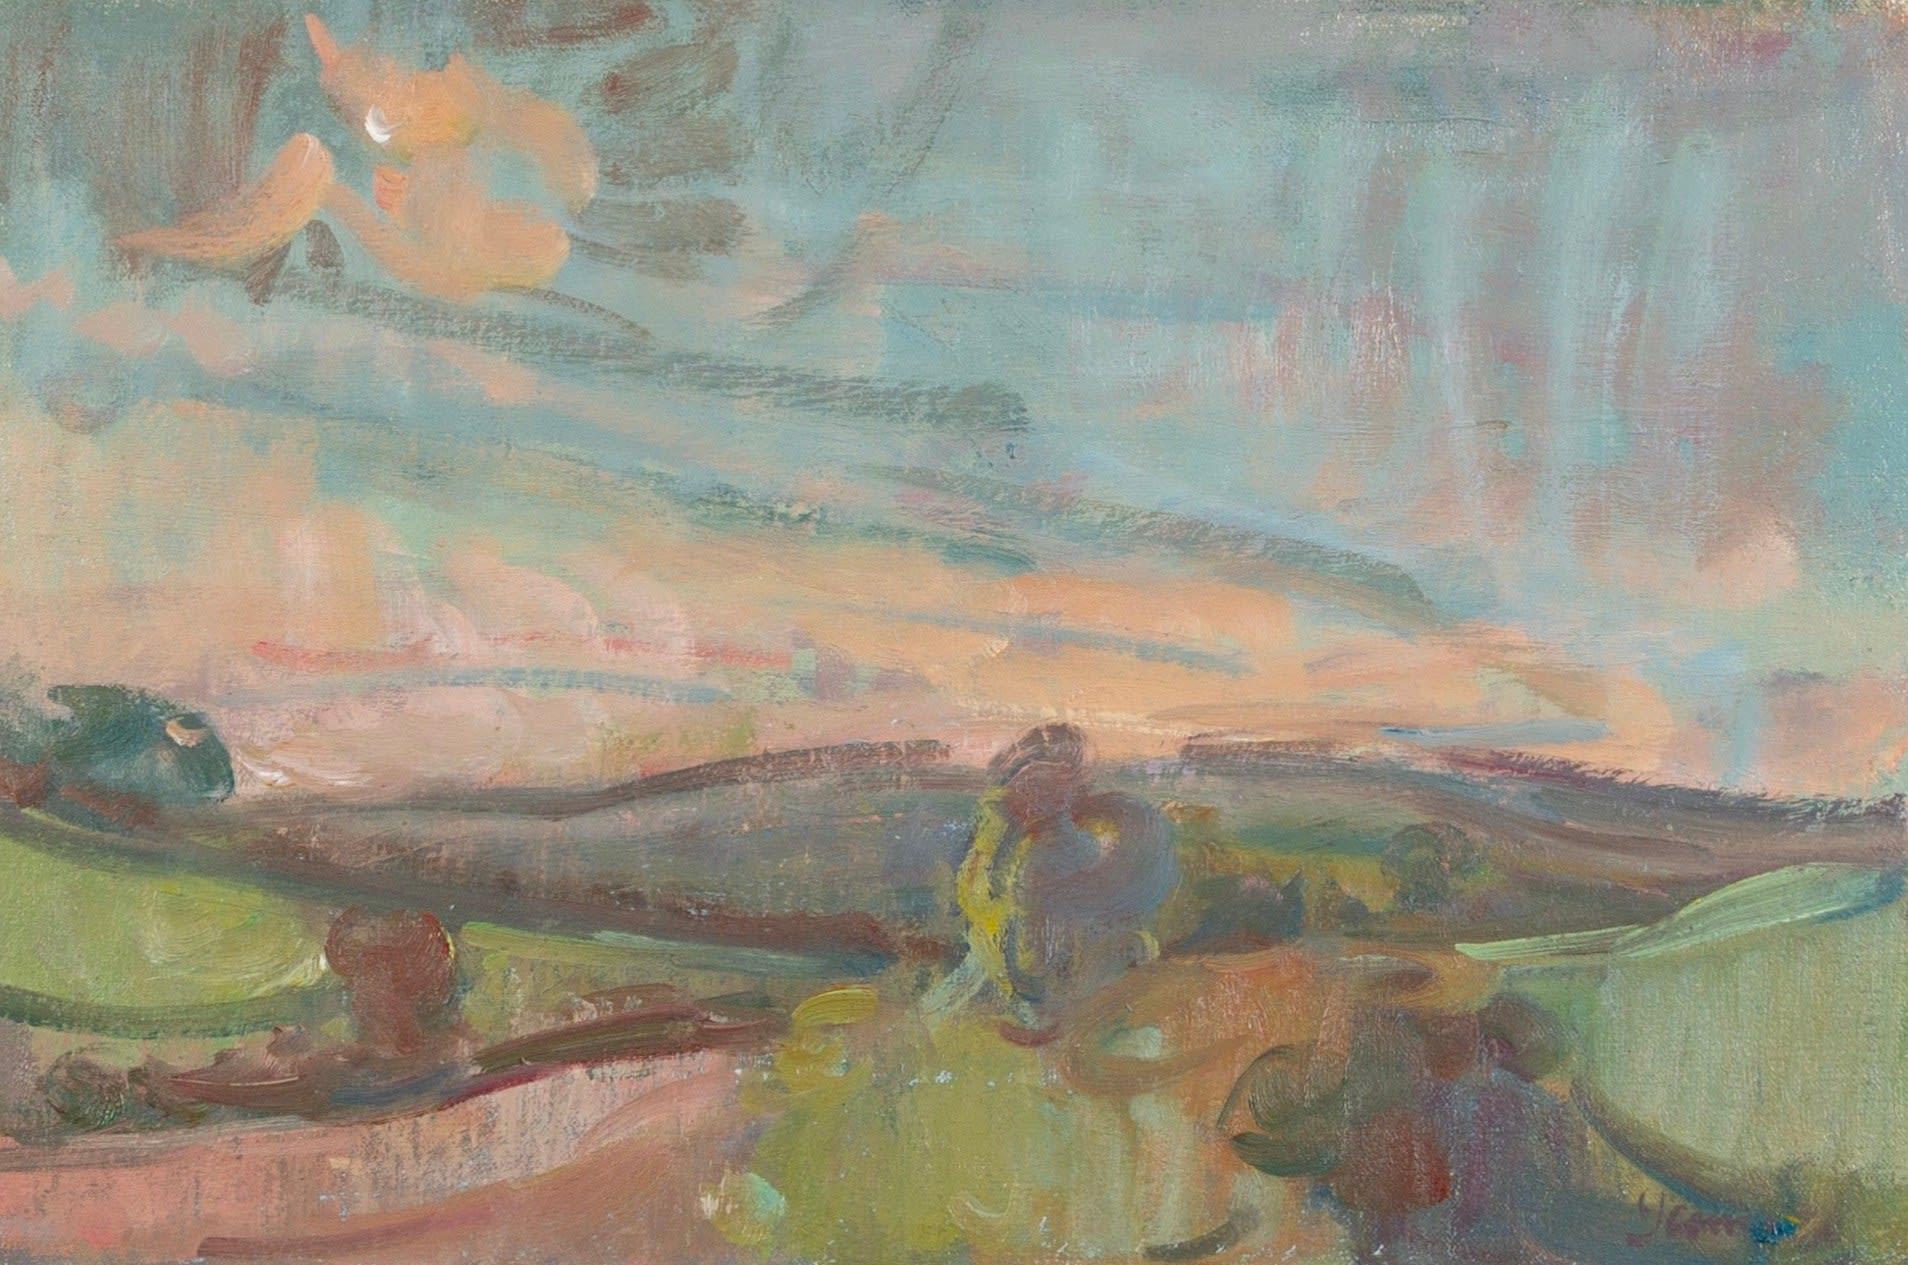 Deverills, Evening, Oil on Canvas Painting by Martin Yeoman B. 1953, 2022

Additional information:
Medium: Oil on canvas
Dimensions: 30 x 45 cm
11 3/4 x 17 3/4 in

Martin Yeoman was born in 1953, and studied with Peter Greenham at the Royal Academy